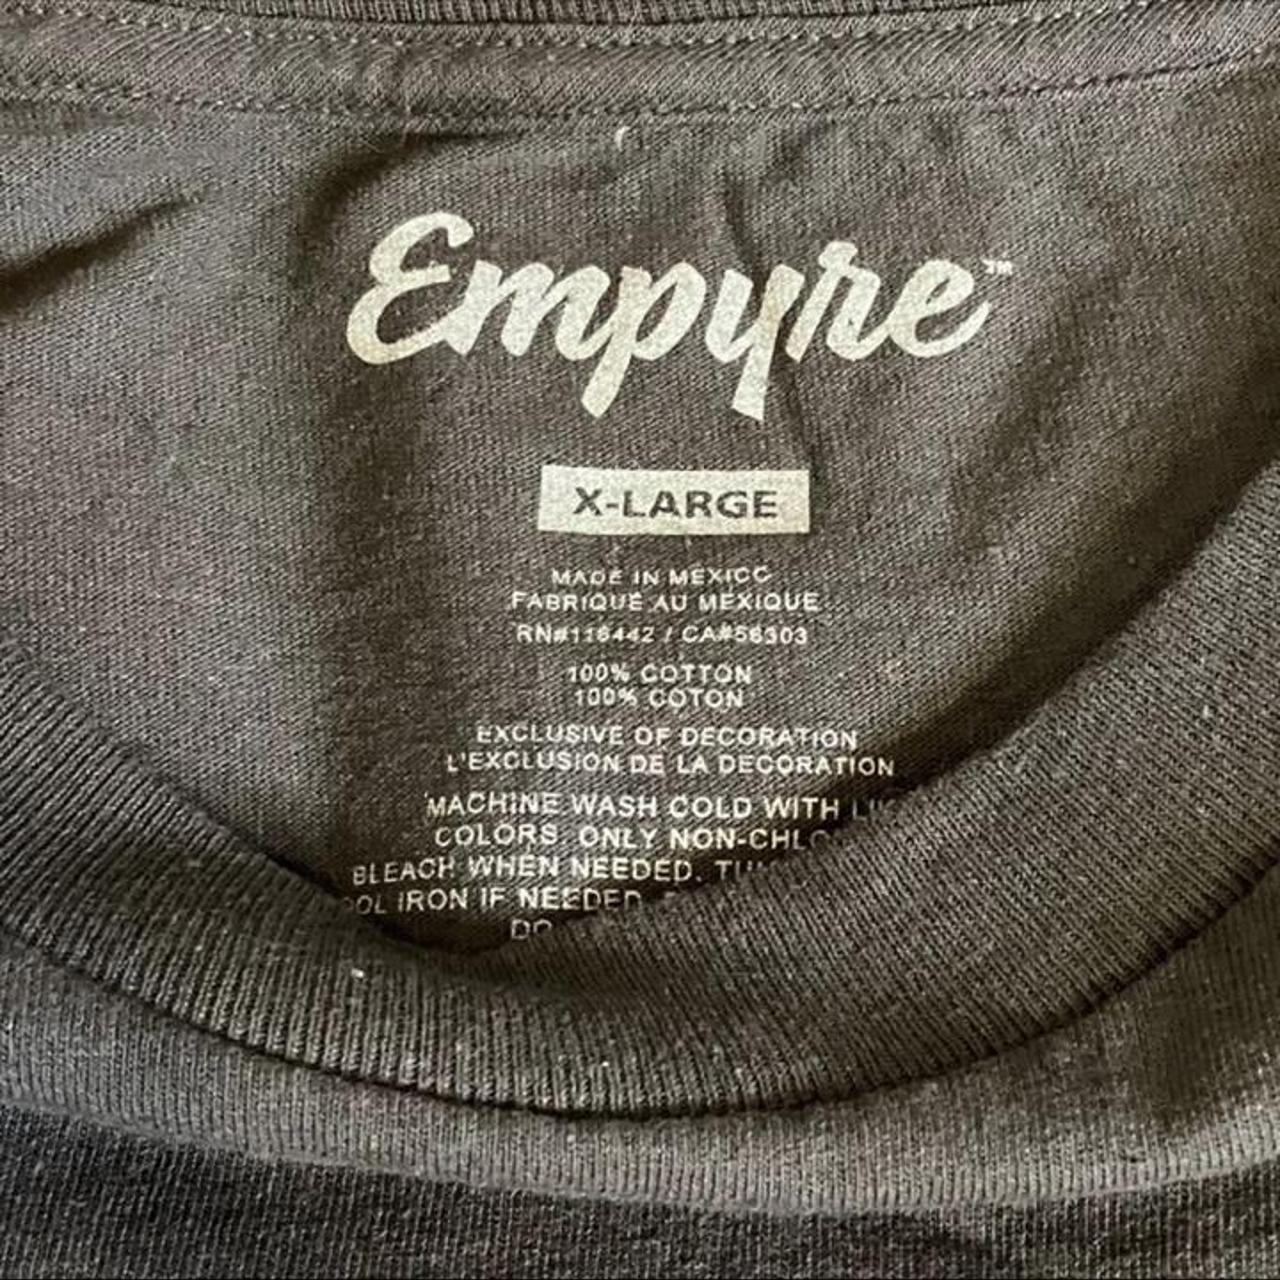 Empyre t-shirt like new, never worn other than for... - Depop